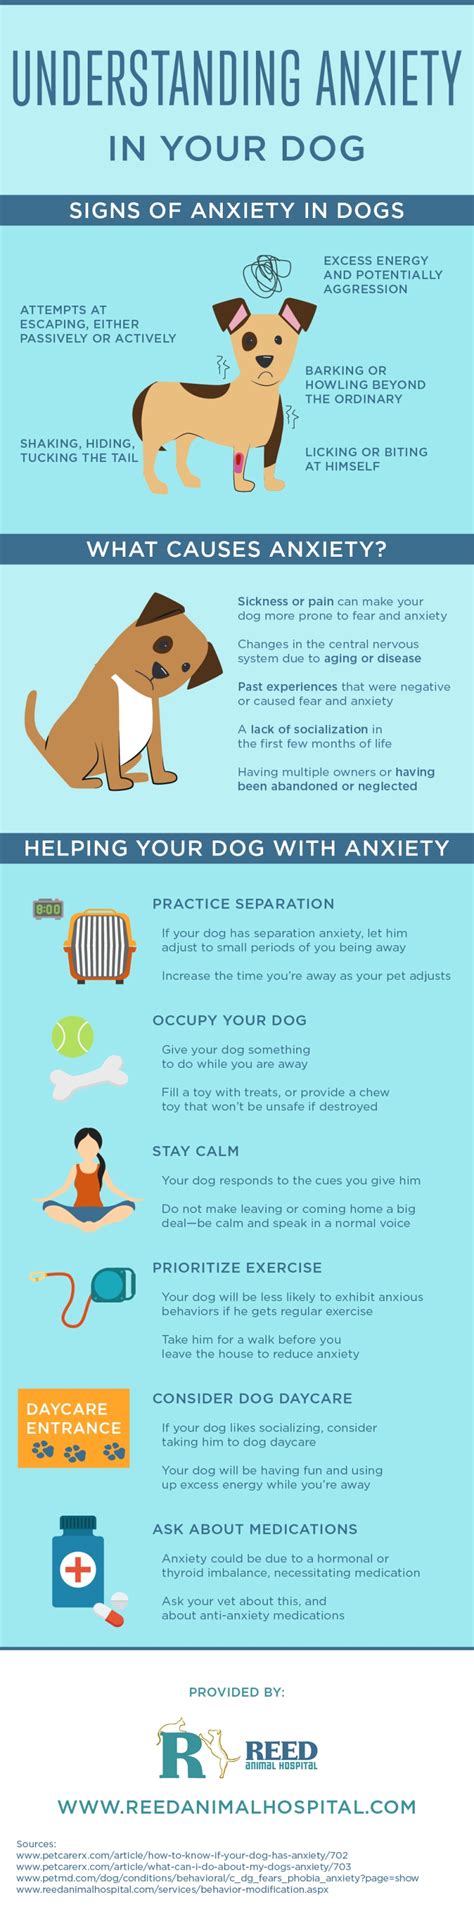  If you are looking for a long-term solution to your dog